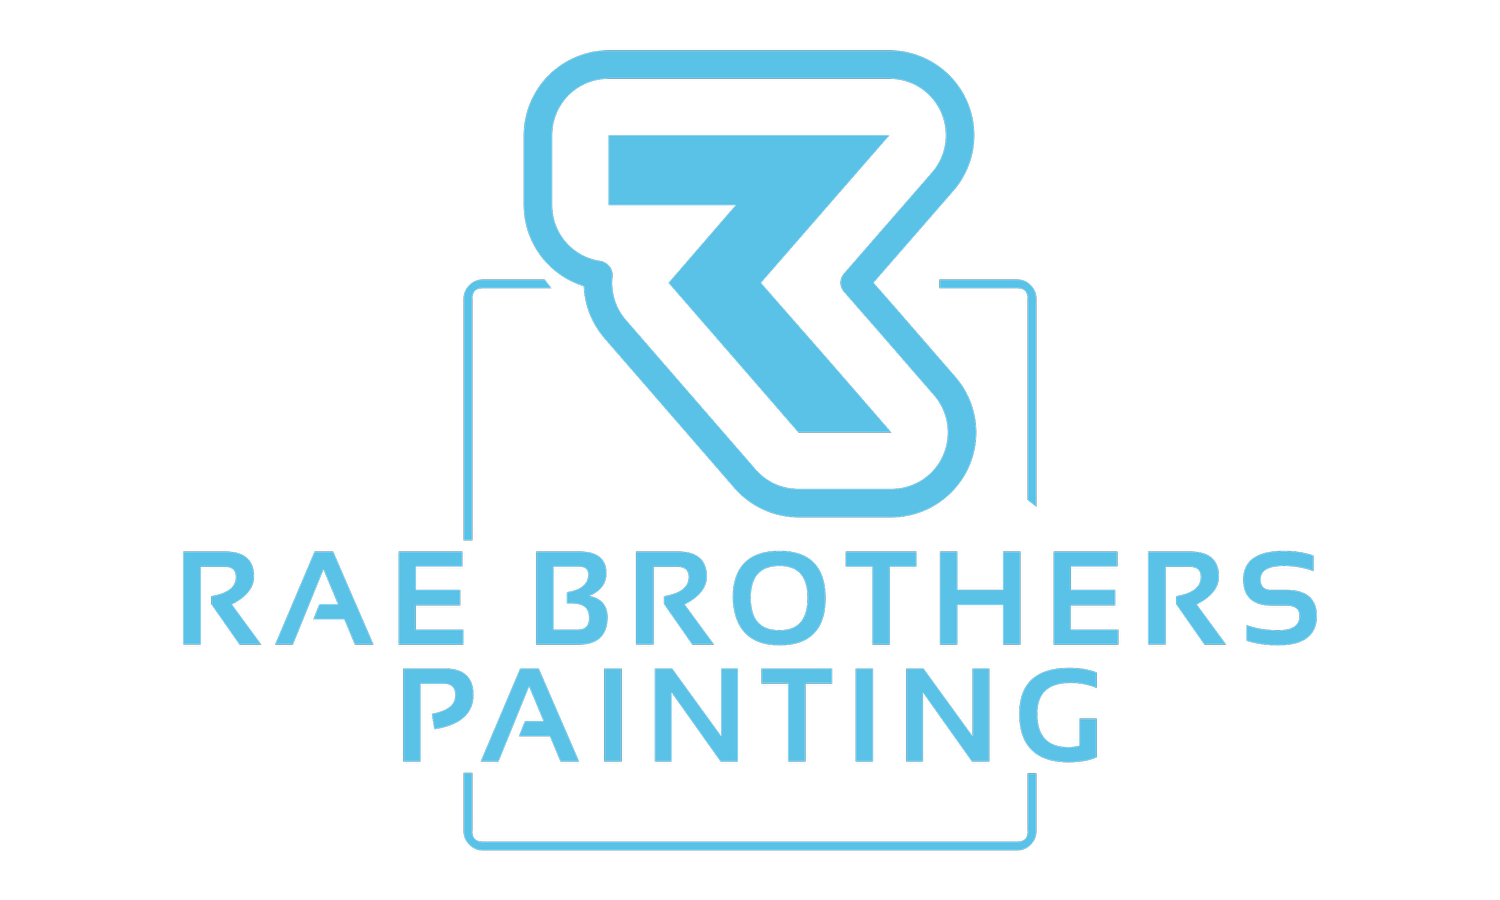 Rae Brothers Painting